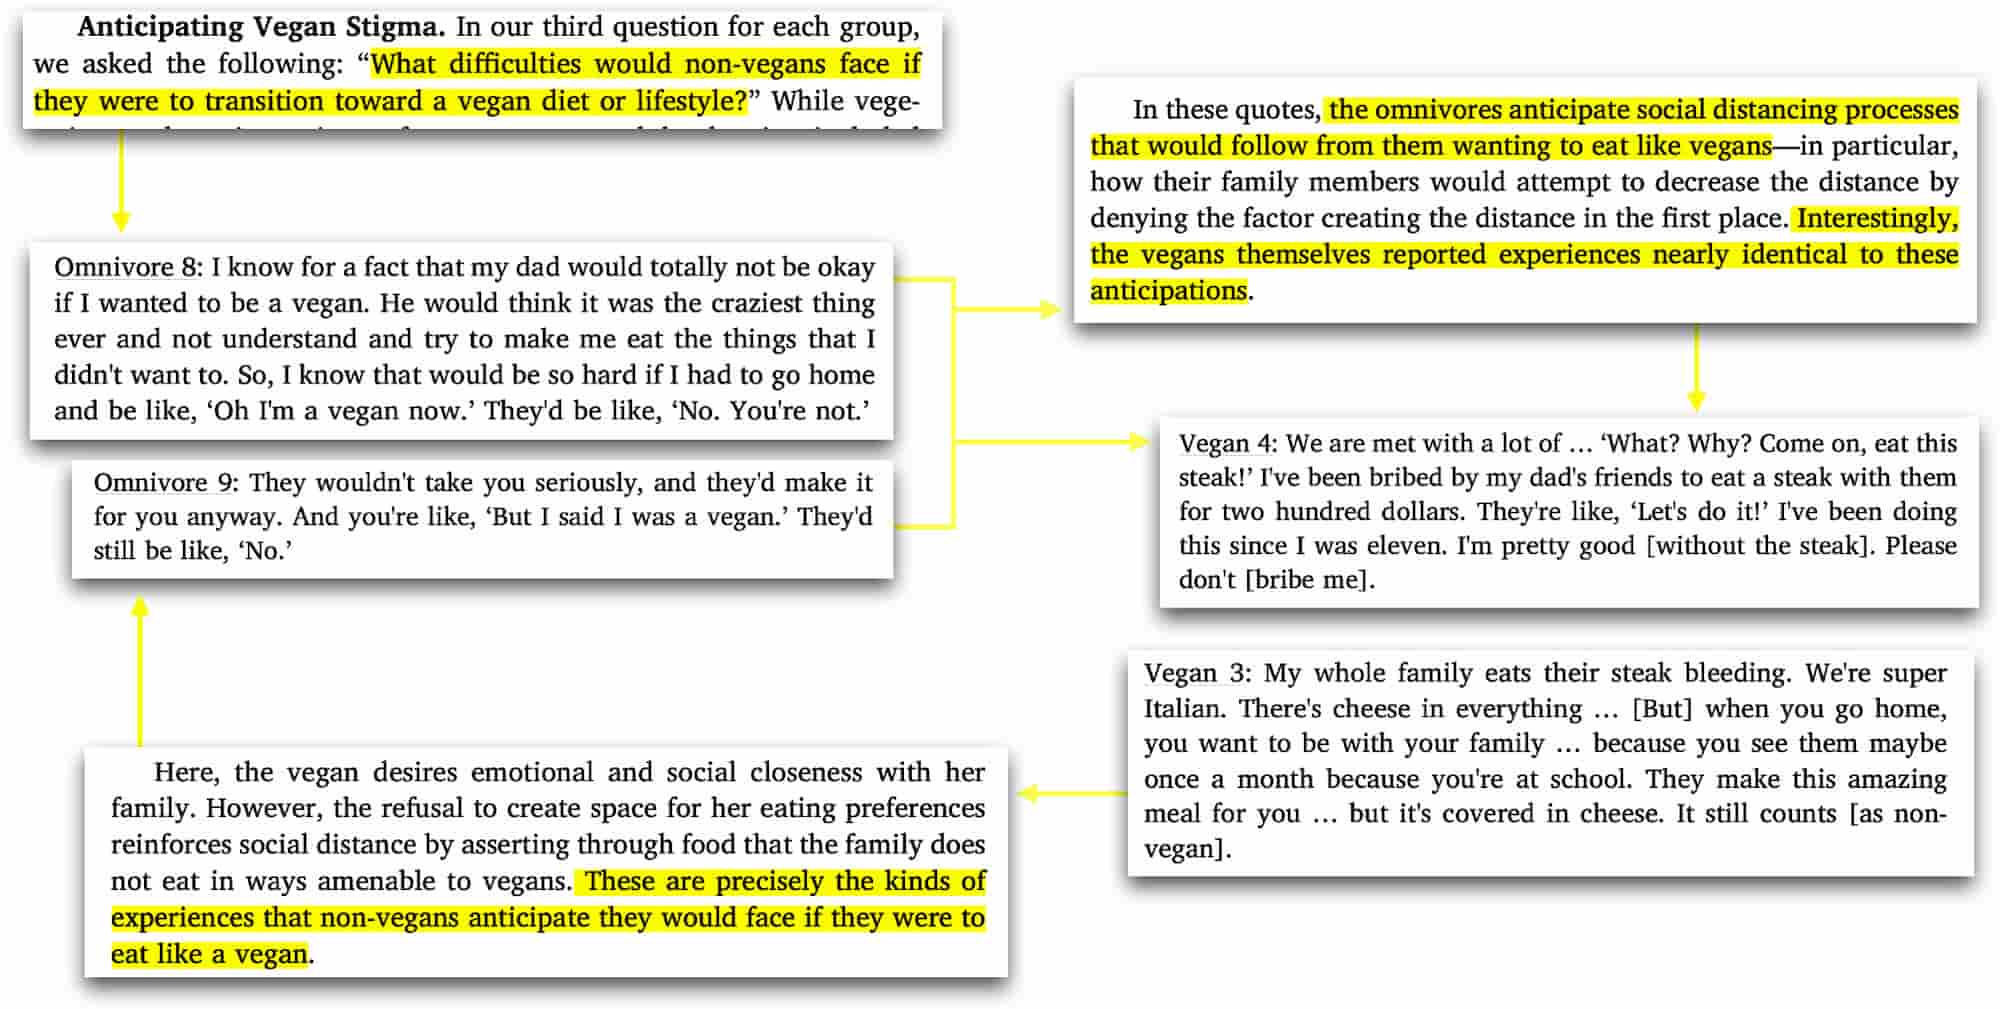 Facilitator questions and study participant responses. Omnivores anticipating they'd be rejected by friends and family if they were vegan, and vegans relaying experiences of rejection nearly identical to those imagined by omnivores. The anticipation of rejection may be a reason for why people "hate" vegans (more accurately, why they stigmatize and stereotype vegans).